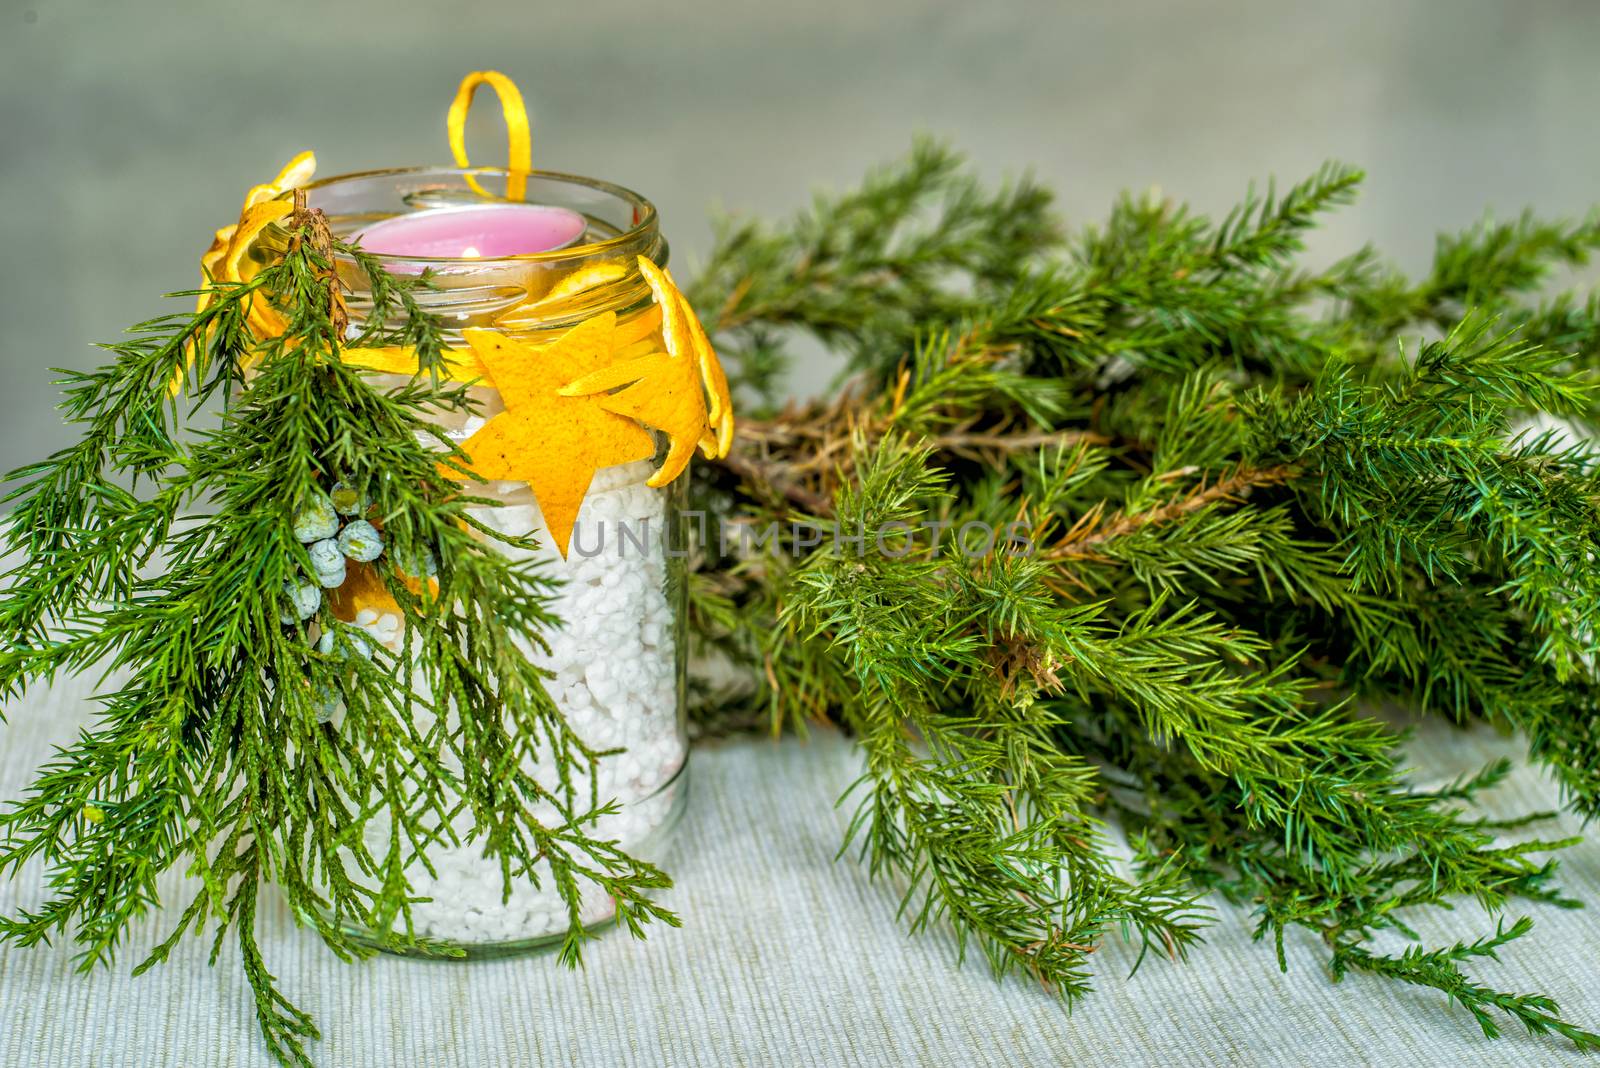 Christmas decorations on the table, hand made candle in a glass bottle with orange peel stars and fir tree branch ,tablecloth and fir tree branch